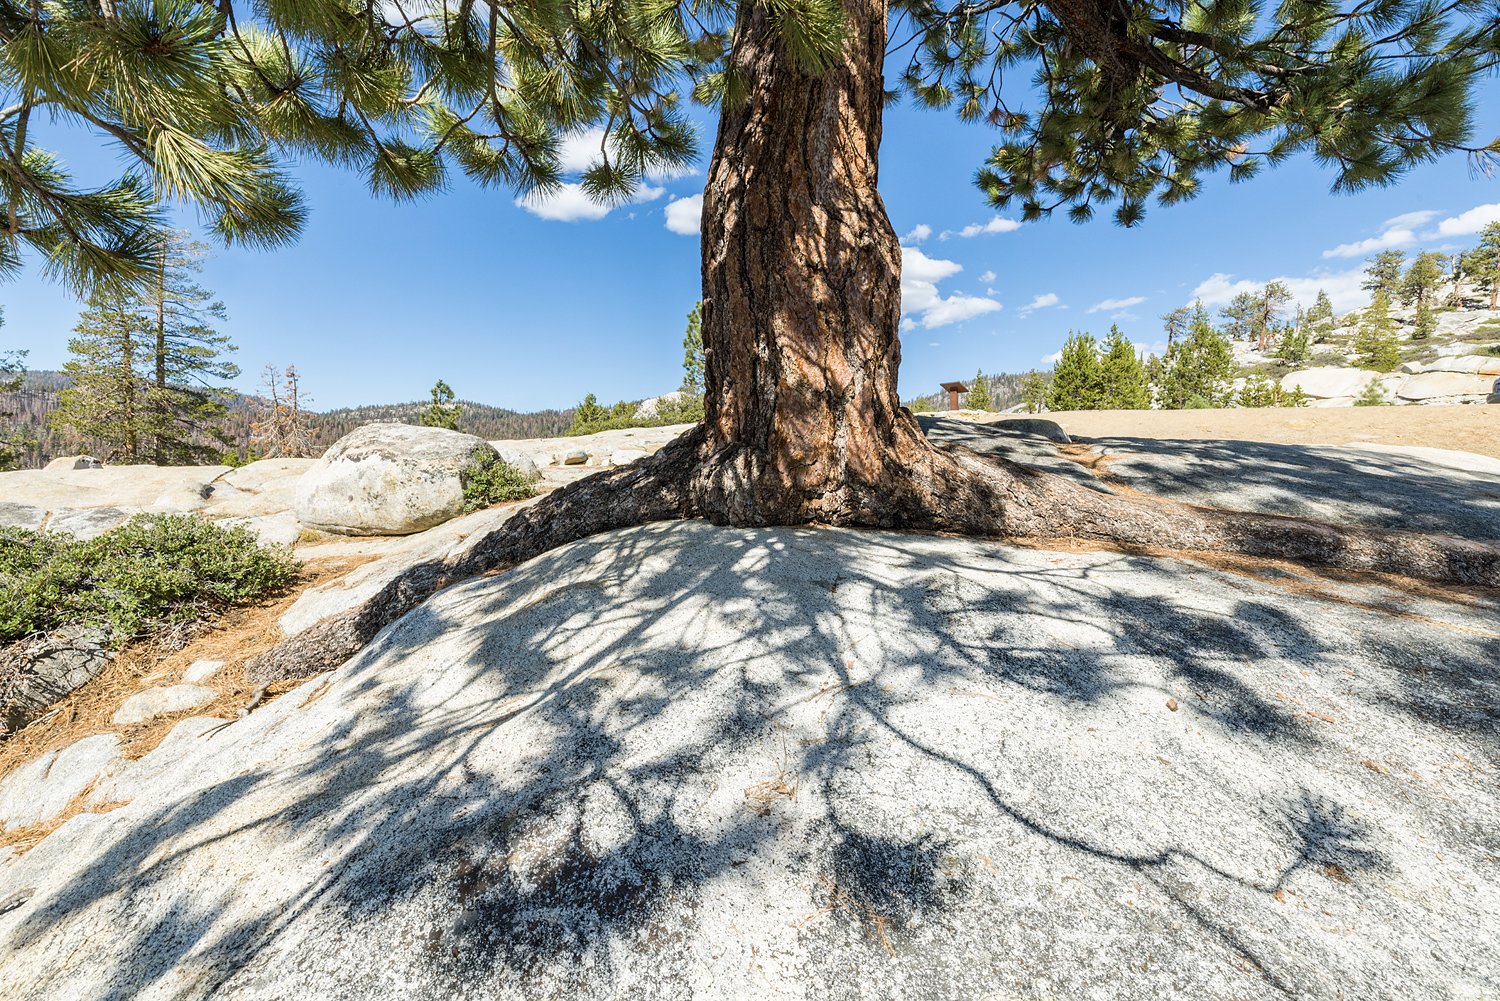 Pine Shadow on Granite. Olmsted Point. Yosemite National Park, CA. 2022